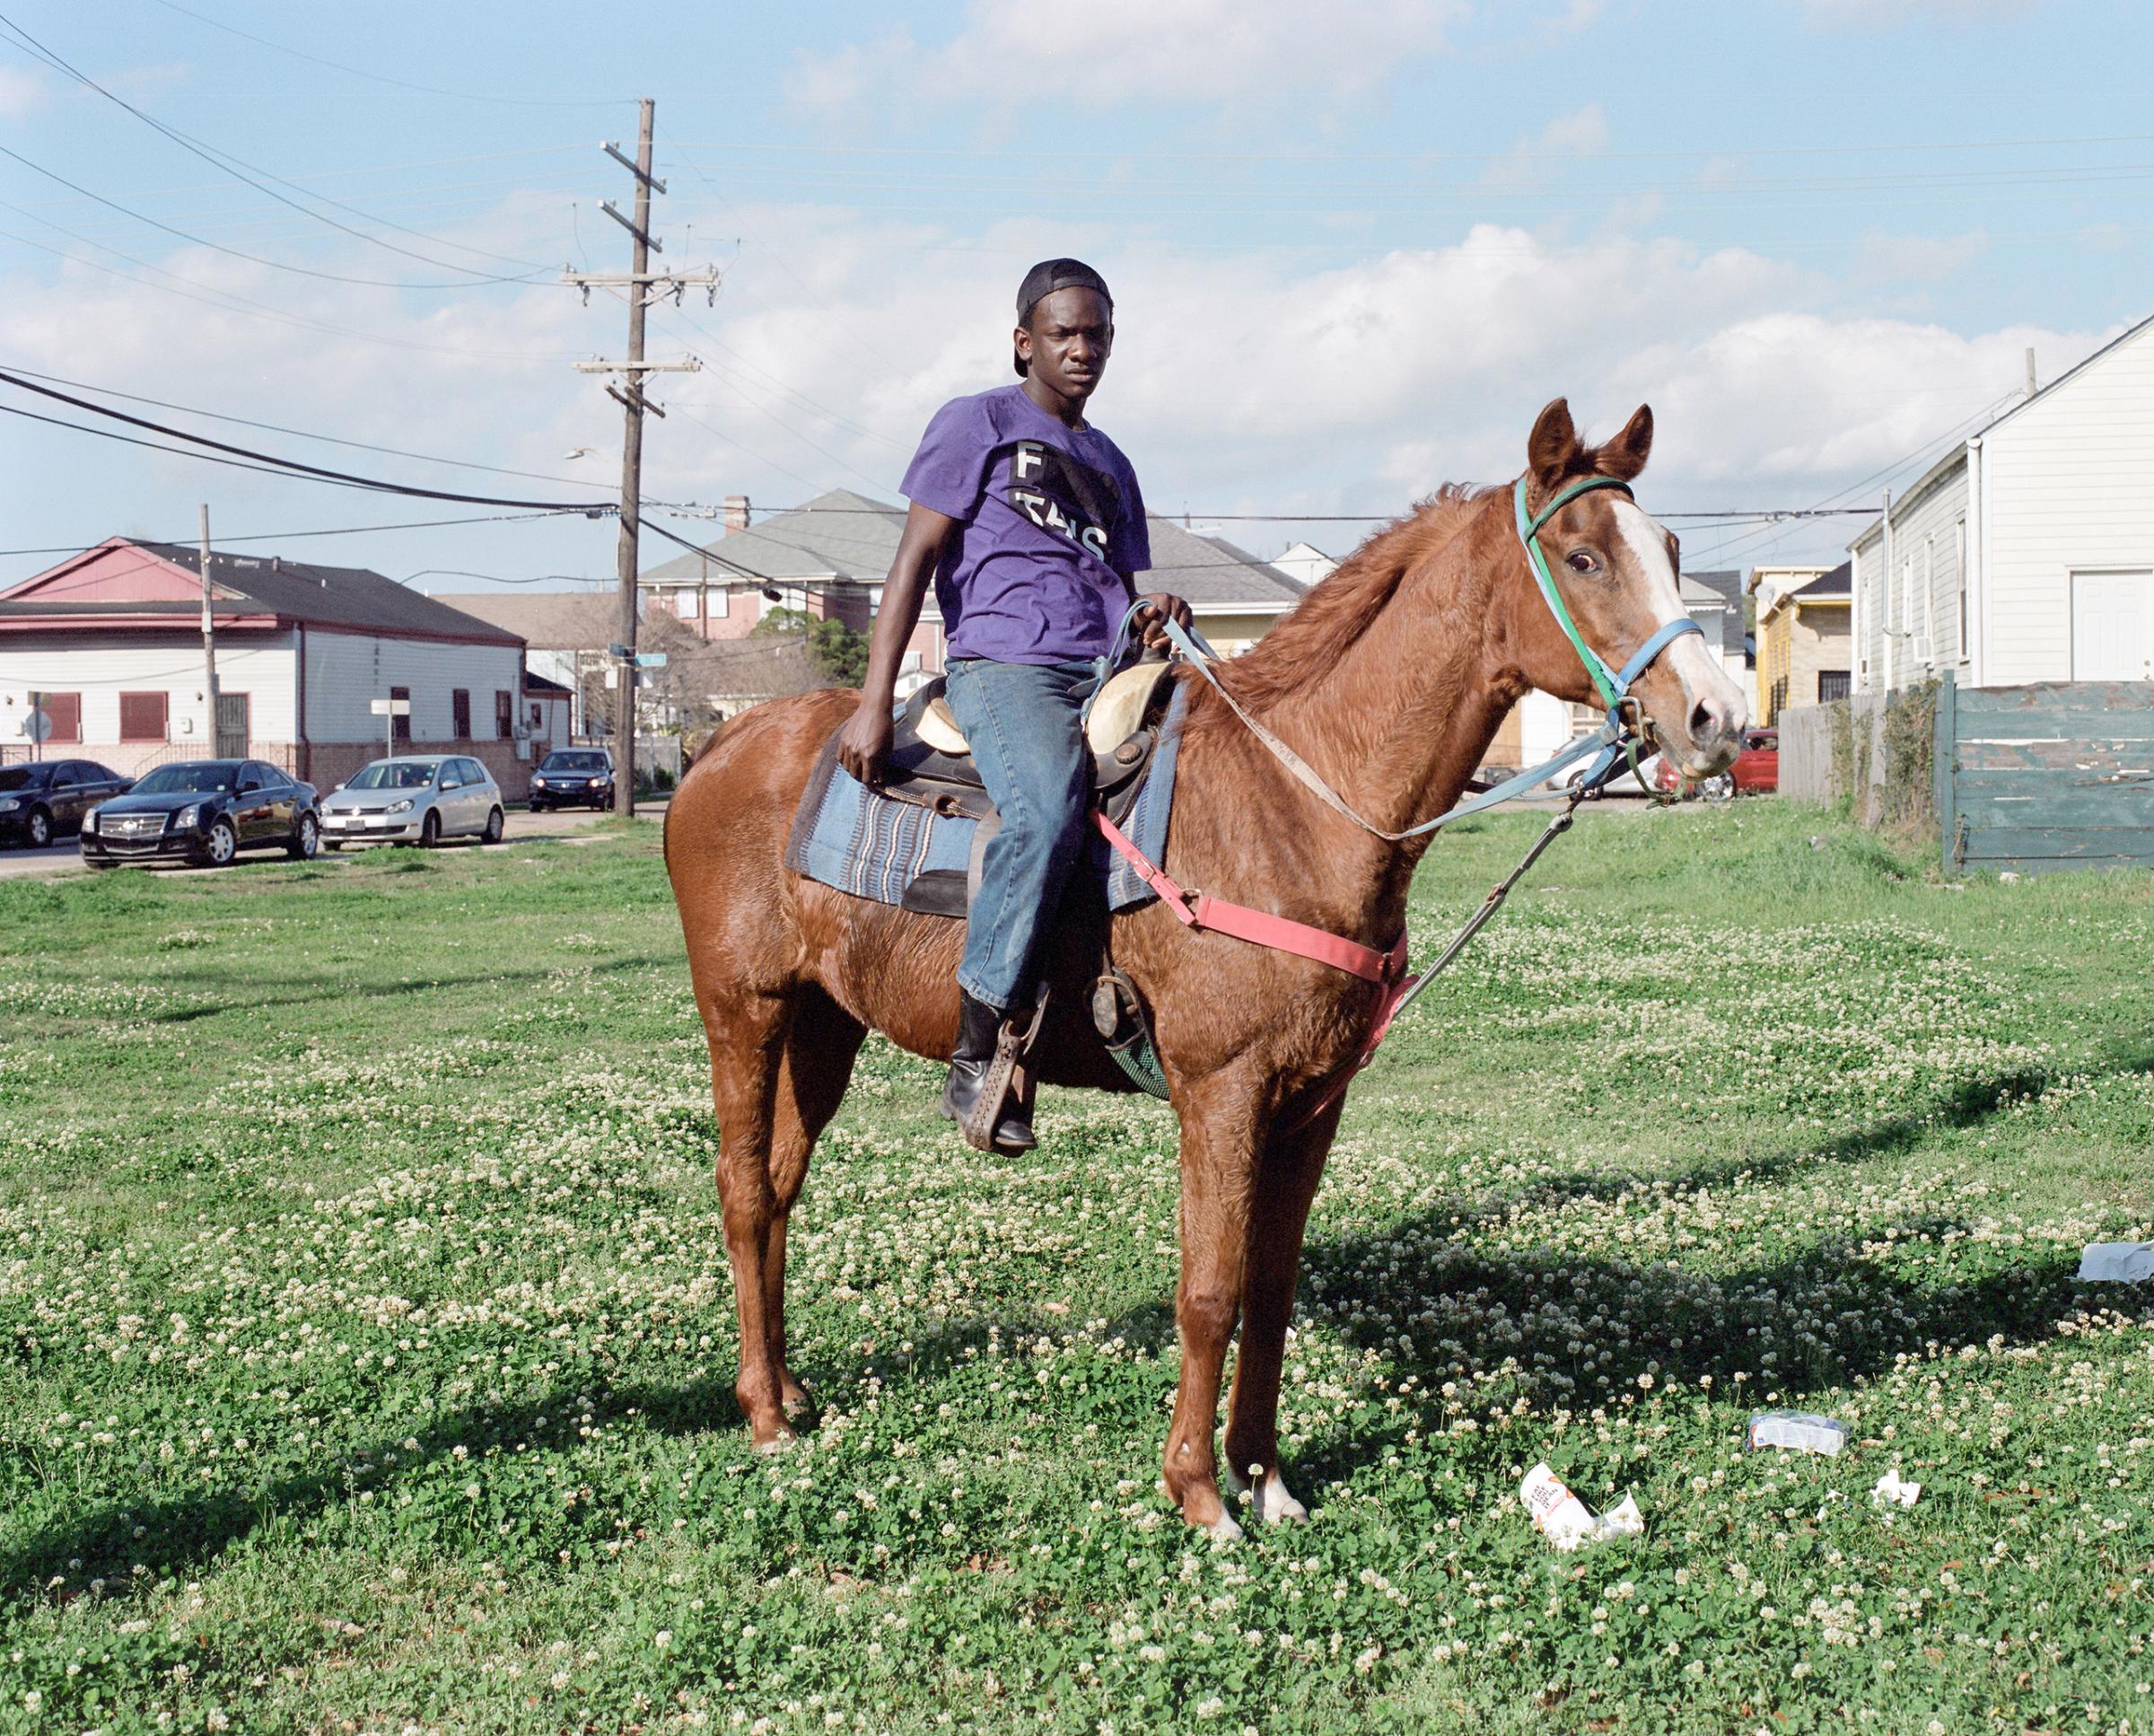 A boy poses on horseback at a Second Line in downtown New Orleans, Louisiana. 2016